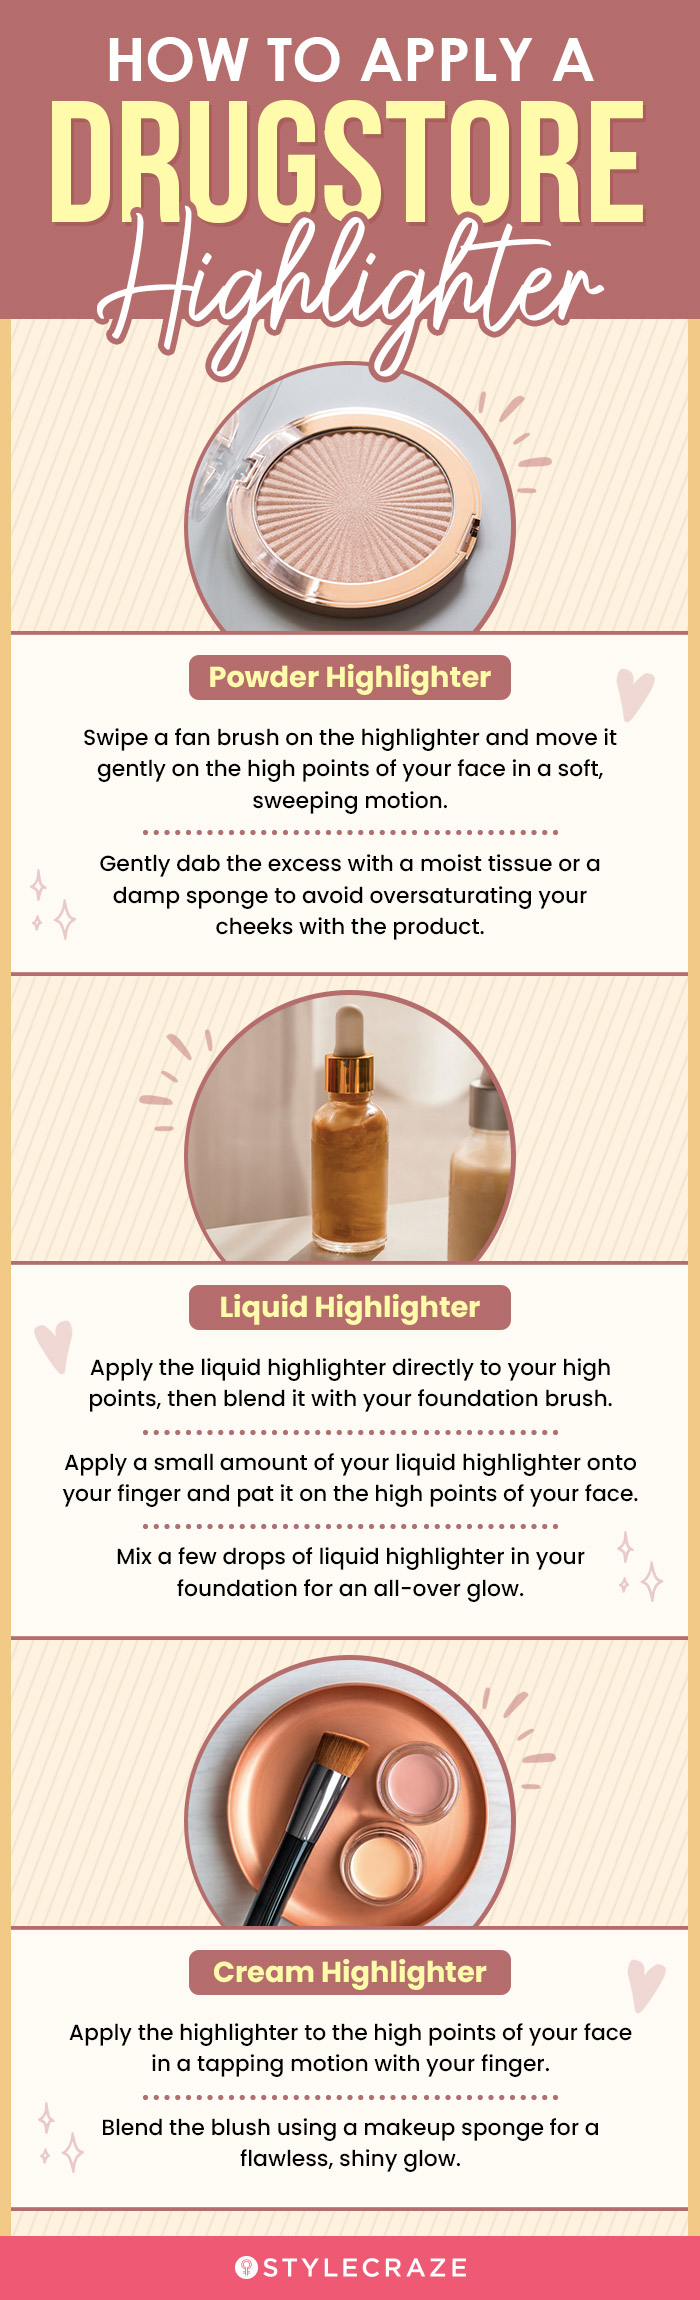 Tips On How To Apply A Drugstore Highlighter (infographic)